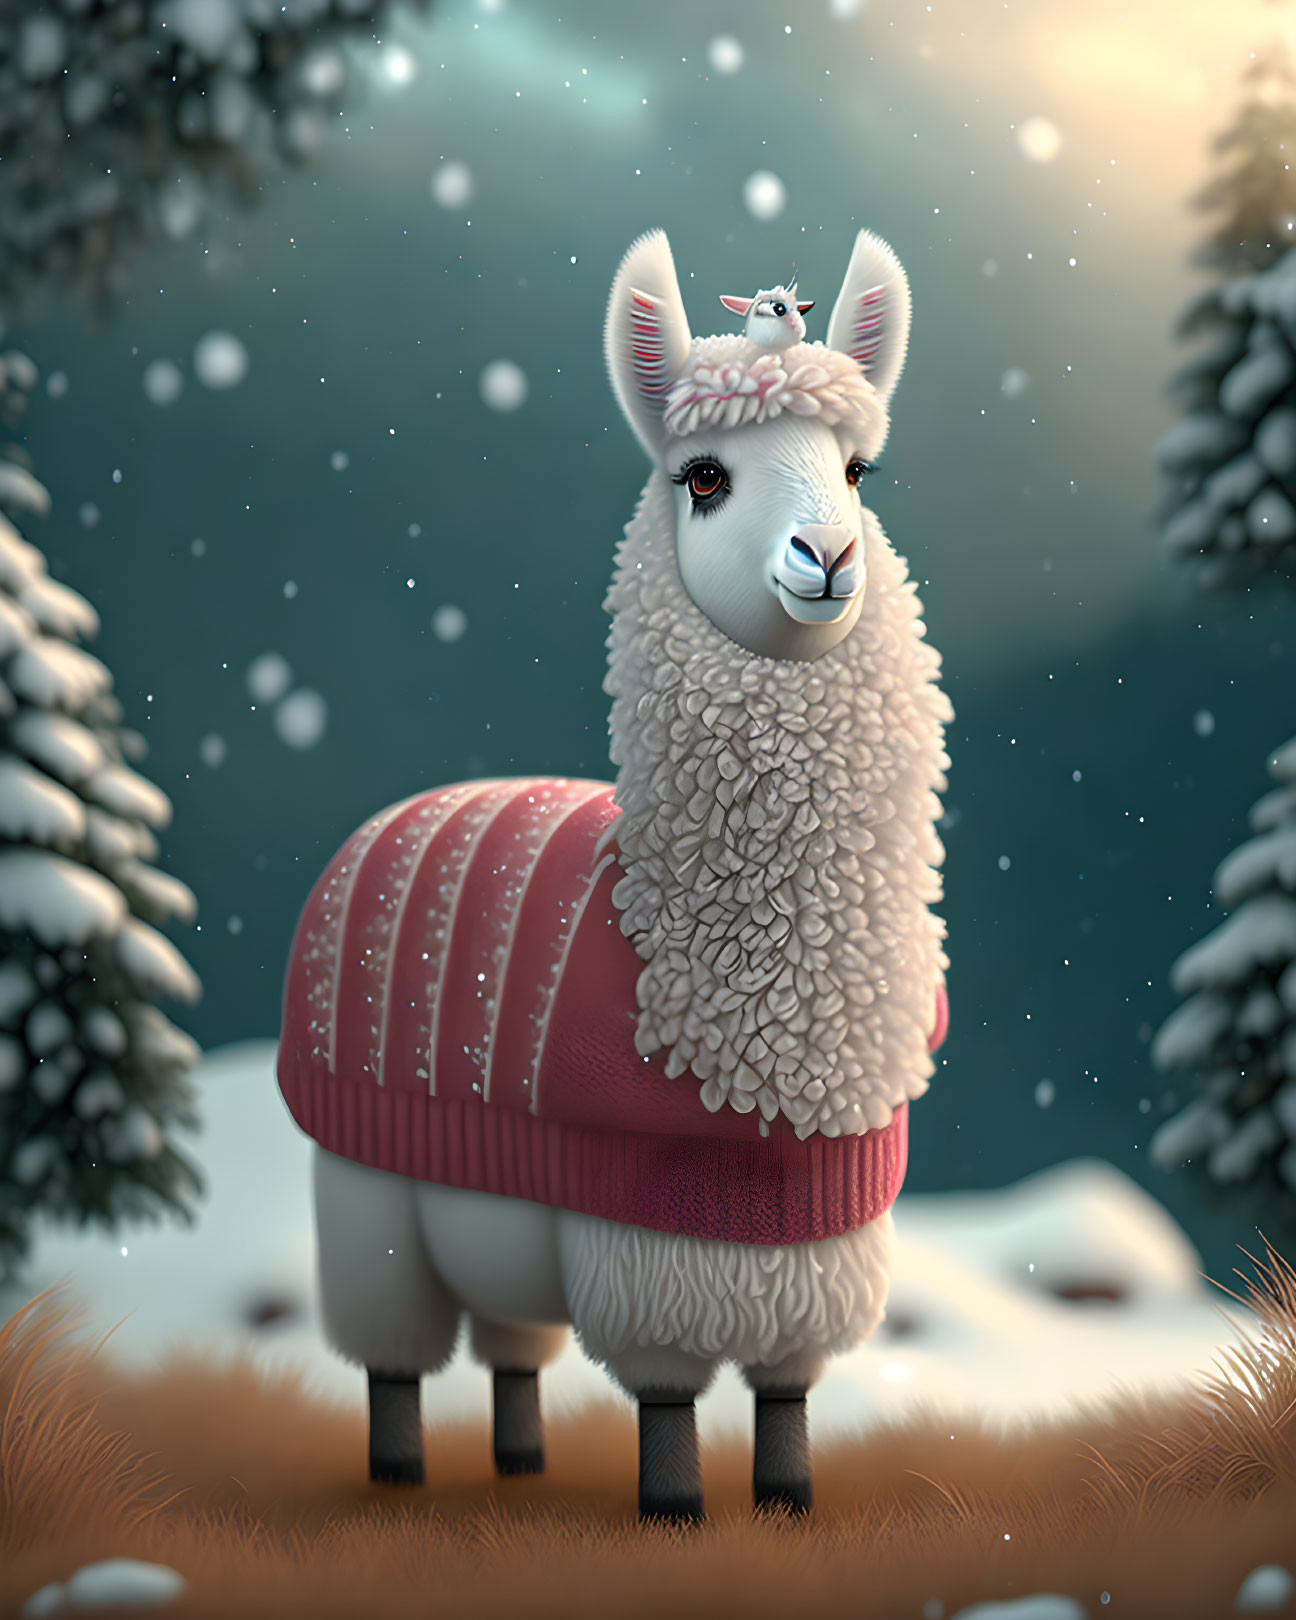 Illustrated llama in red sweater with bird in snowy landscape